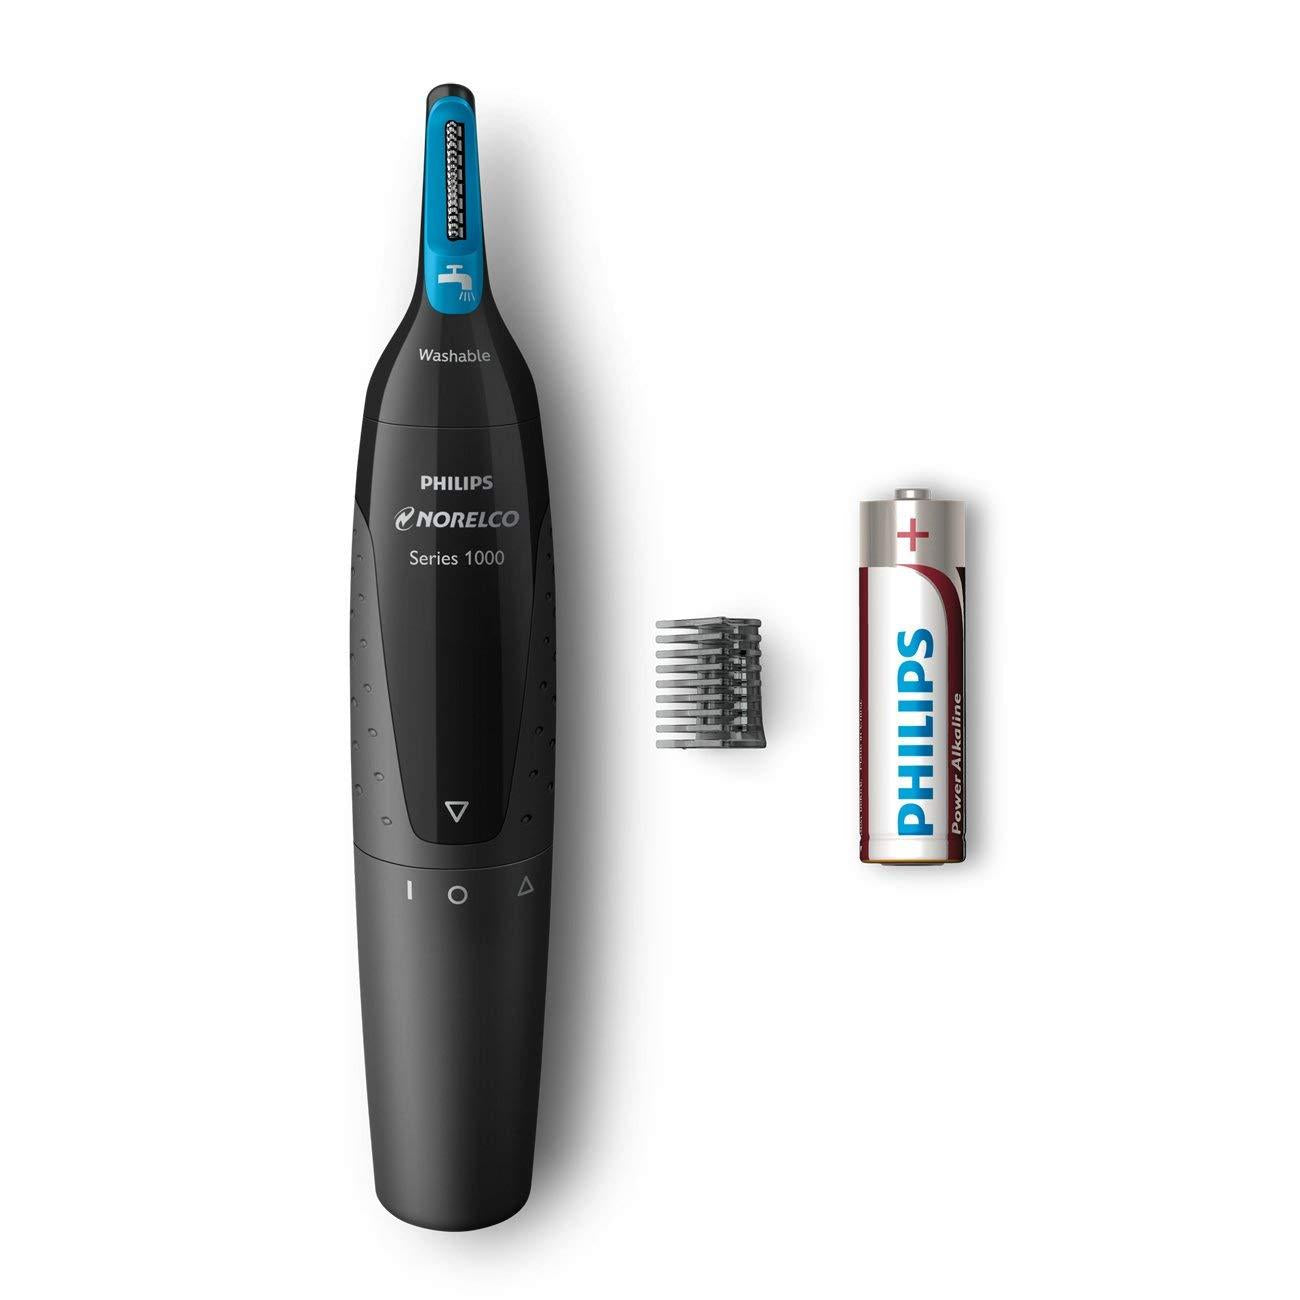 Philips Norelco 1700 Nose Ears and Eyebrow Hair Trimmer NT1700/49 Comfortable Washable (Series 1000)